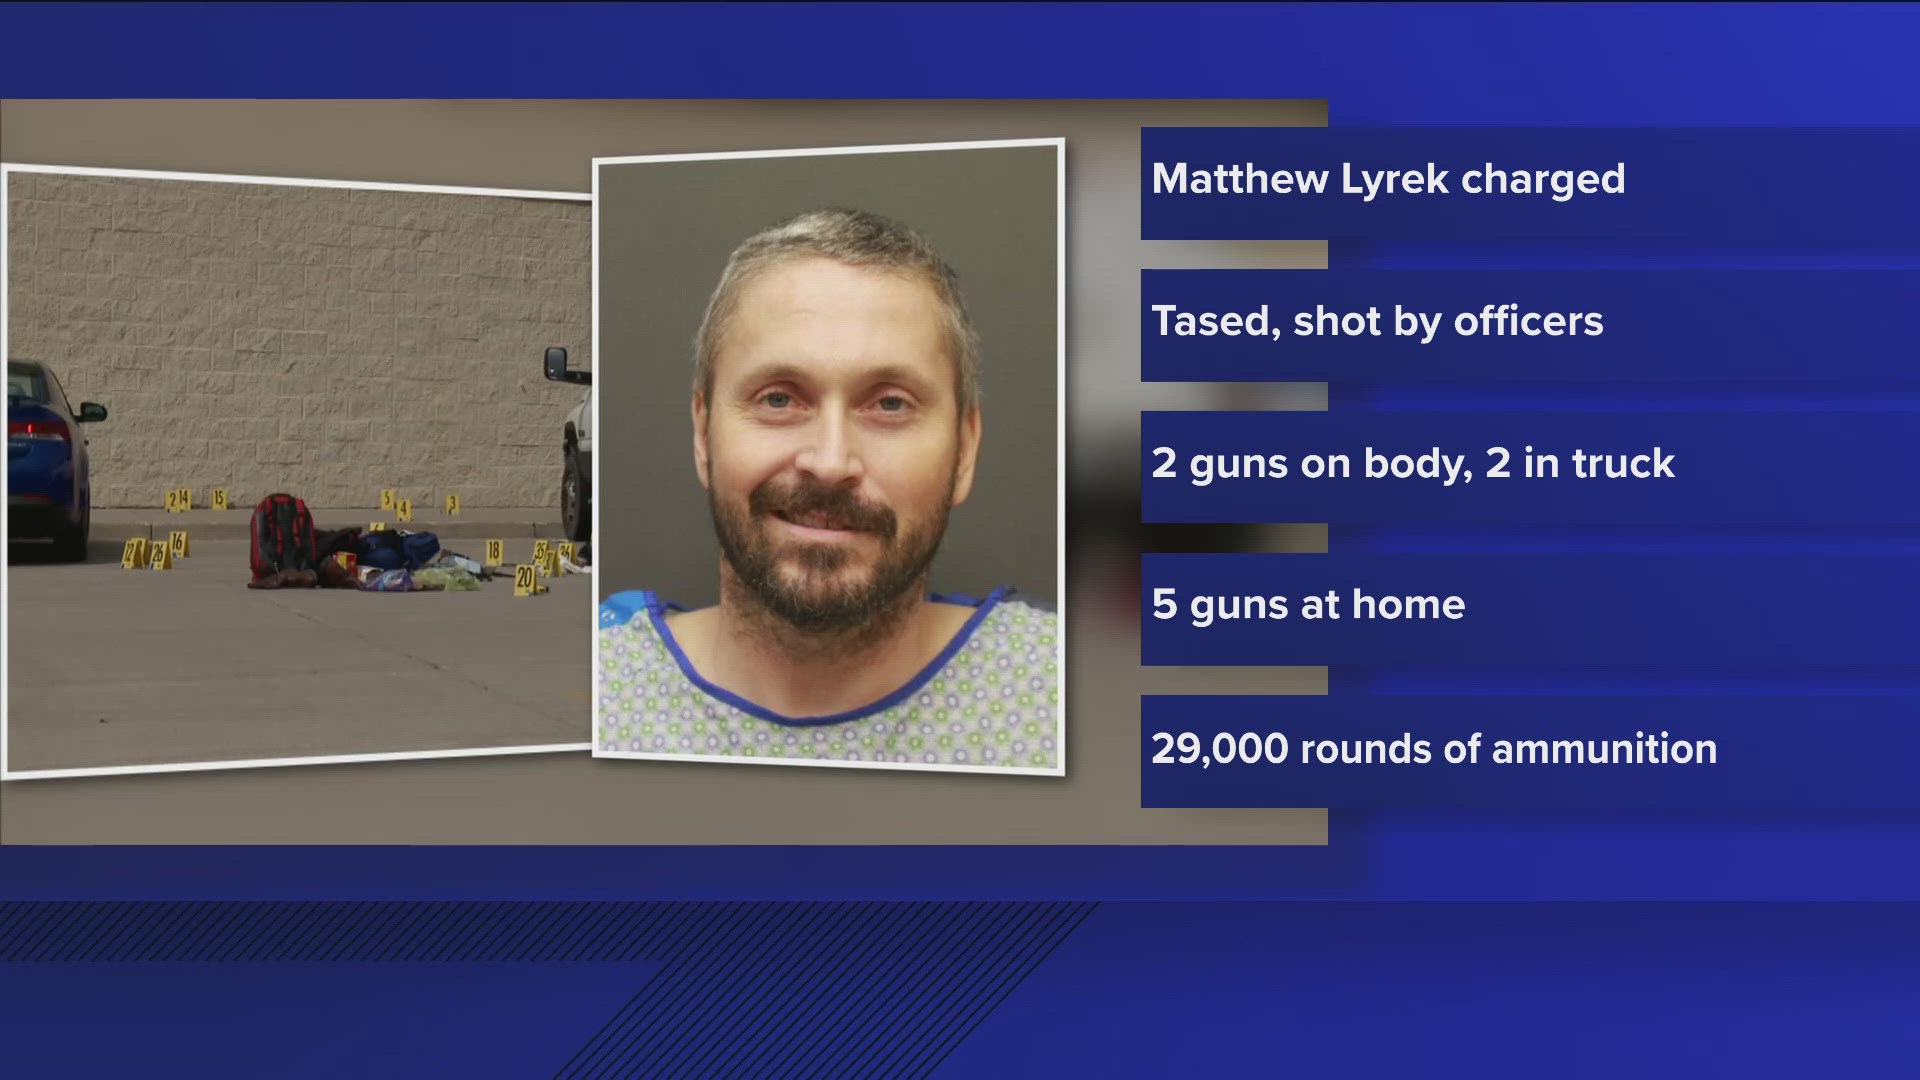 Matthew Lyrek faces 11 felony counts ranging from use of deadly force against a police officer to possession of a firearm by a person under an order for protection.